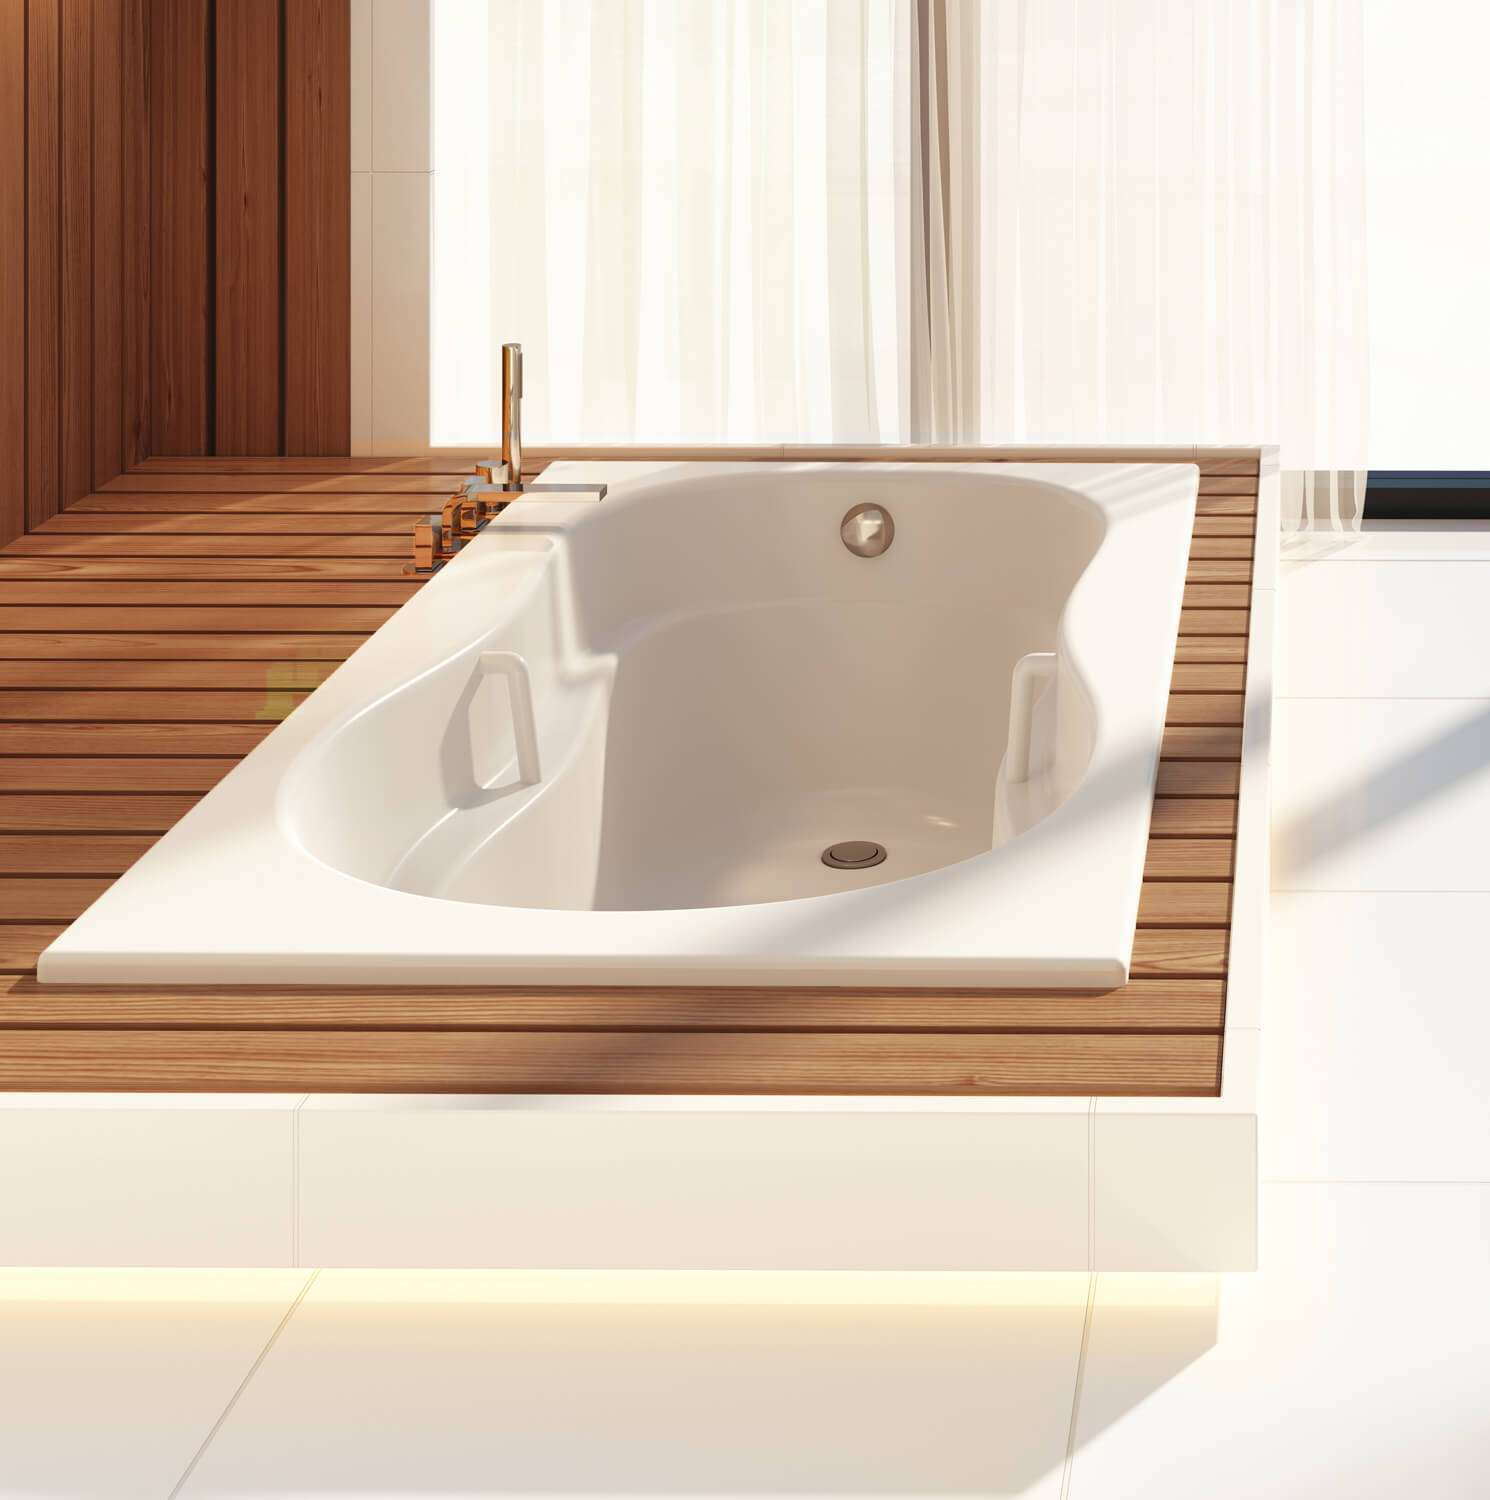 Bainultra Azur 60 collection alcove drop-in air jet bathtub for your master bathroom